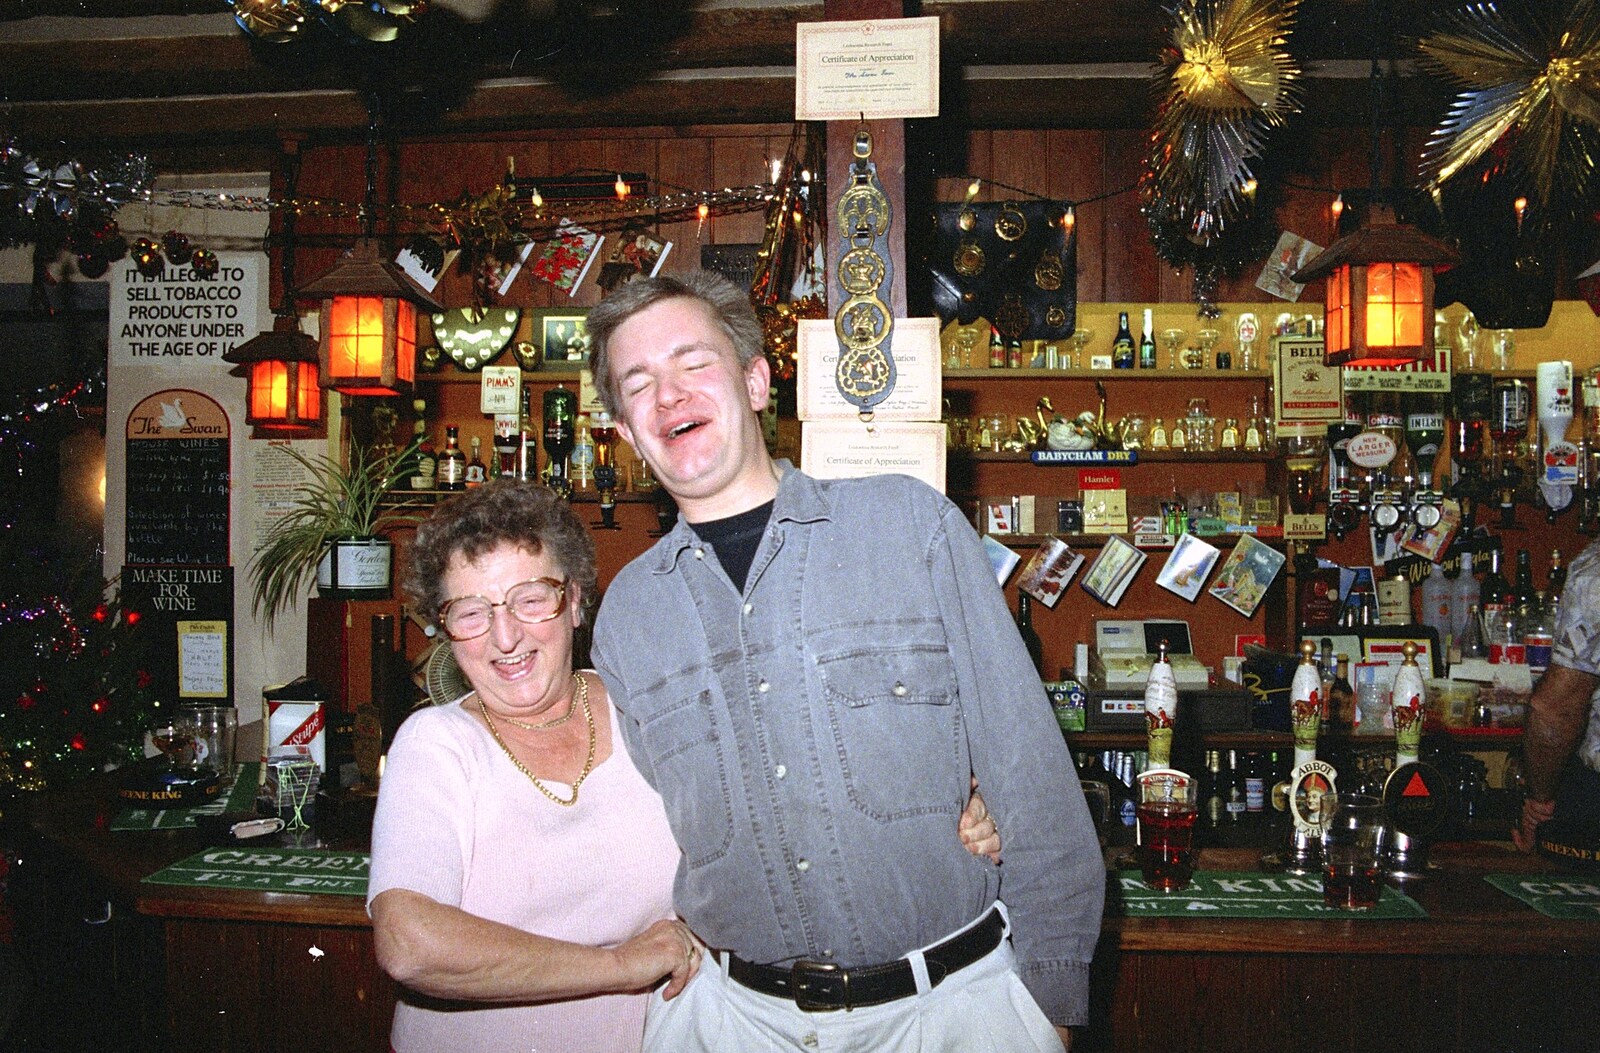 Arline and Nosher from New Year's Eve at the Swan Inn, Brome, Suffolk - 31st December 1994